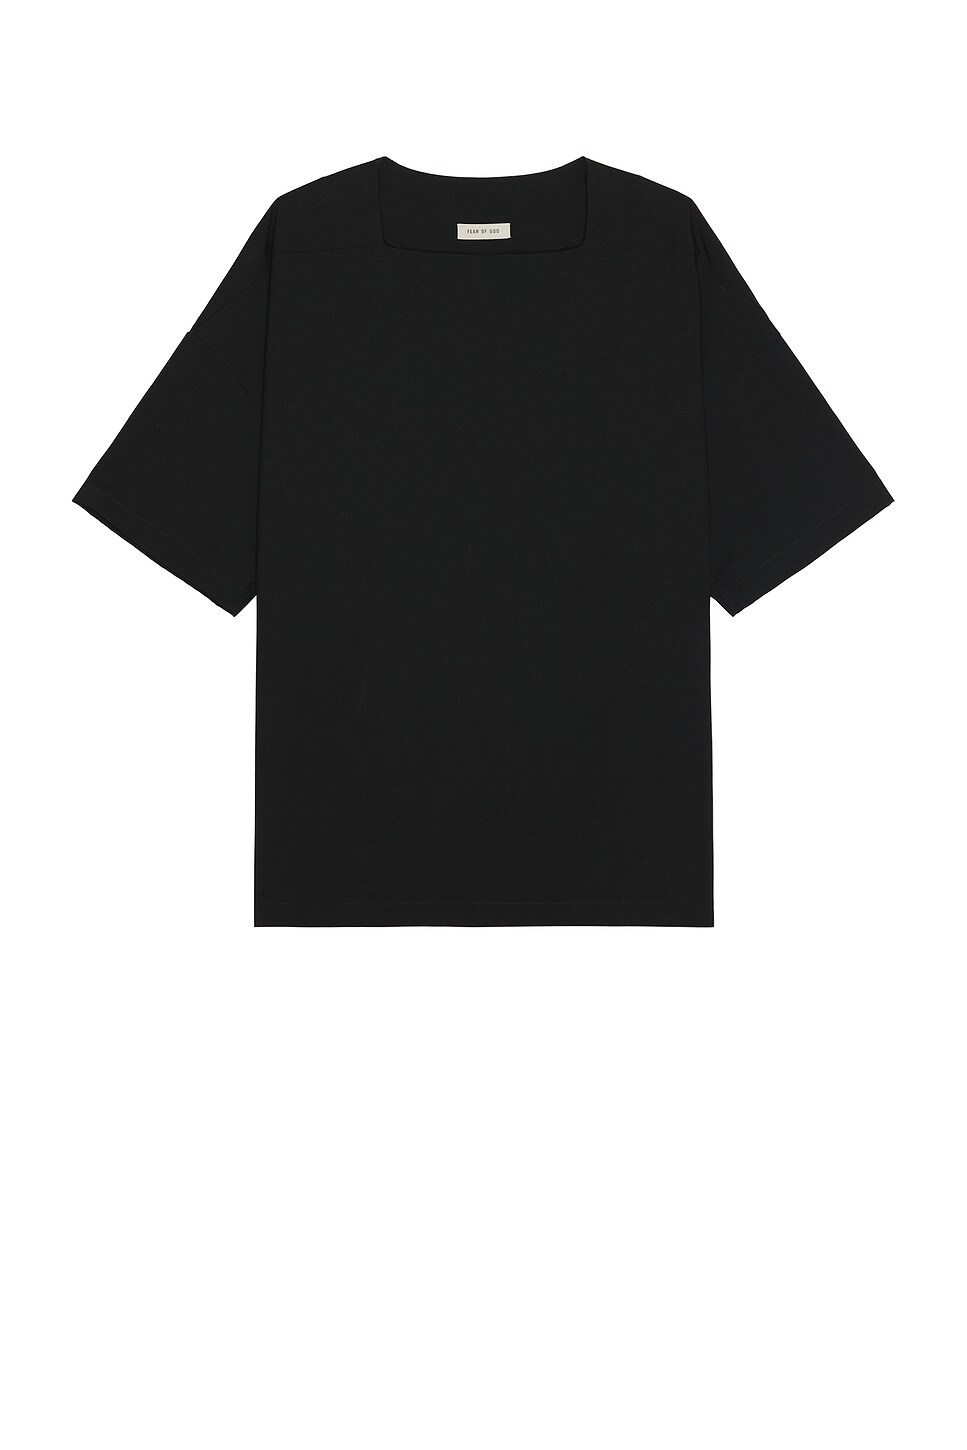 Image 1 of Fear of God Straight Neck SS Top in Black